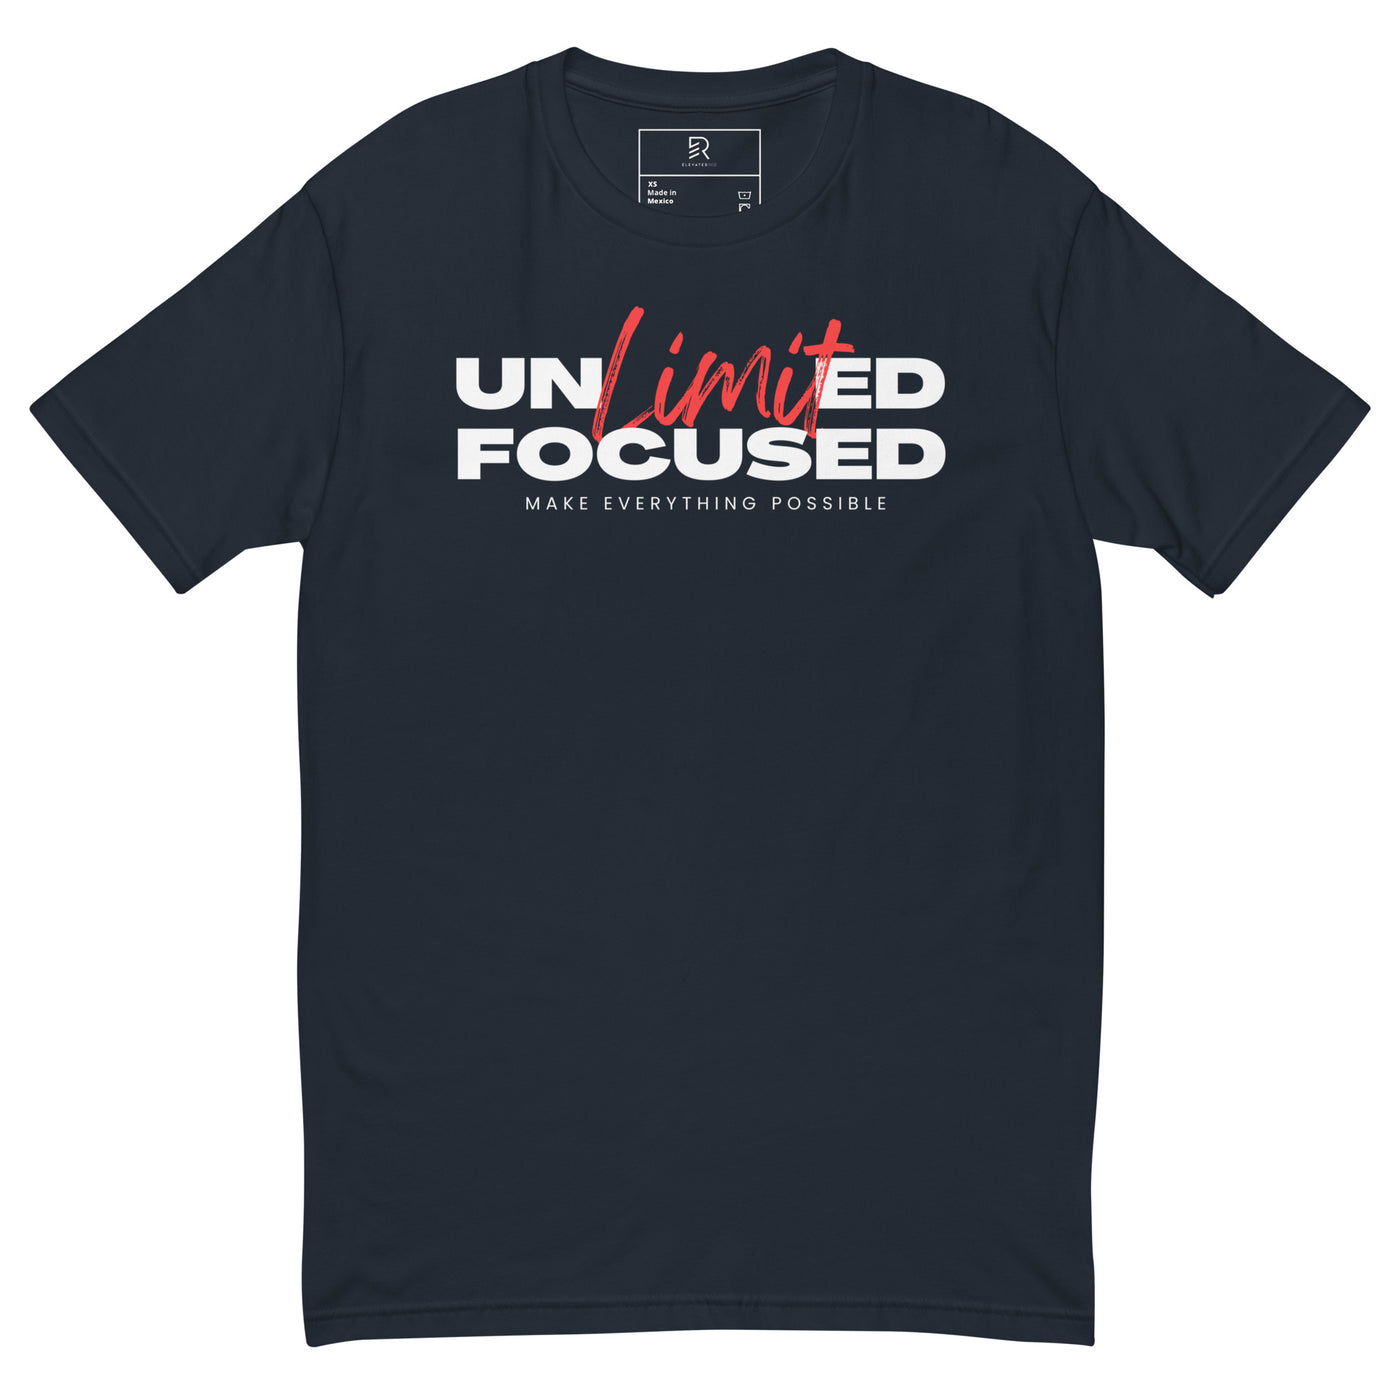 Men's Fitted Midnight Navy T-shirt - Unlimited Focus